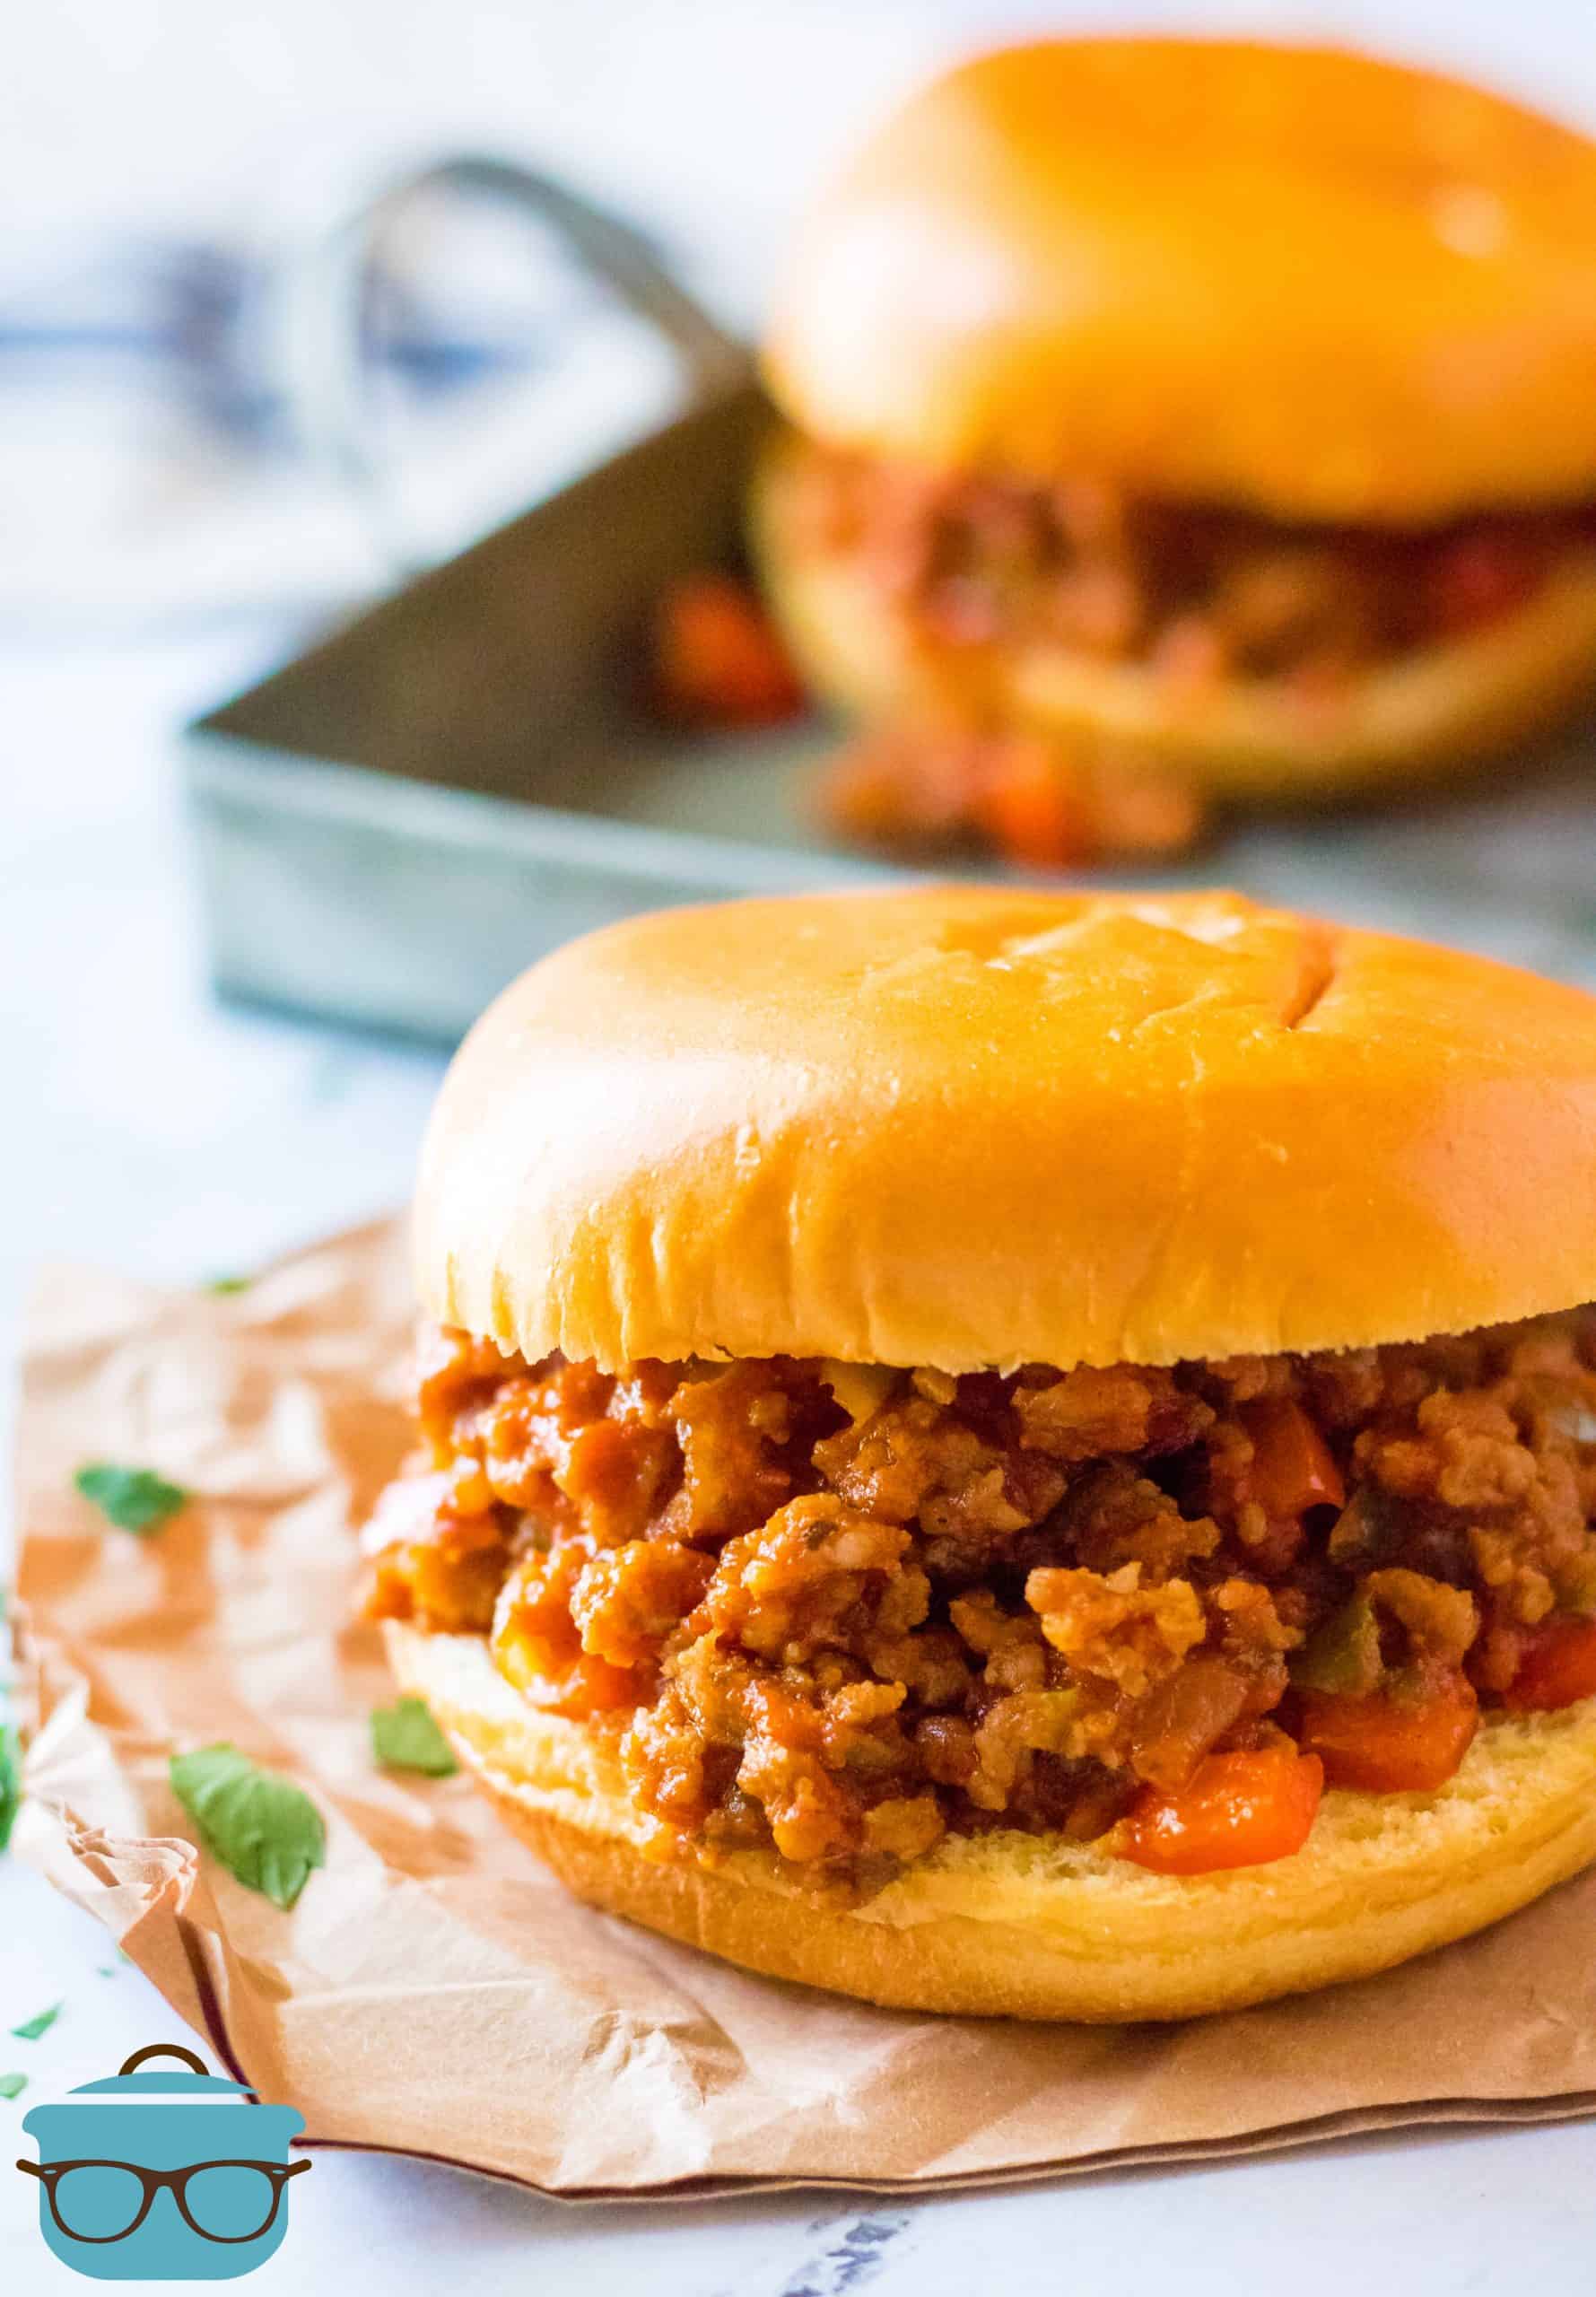 Sausage and Peppers Italian Sloppy Joes, sandwich shown on brown napkins with a sandwich in the background. 